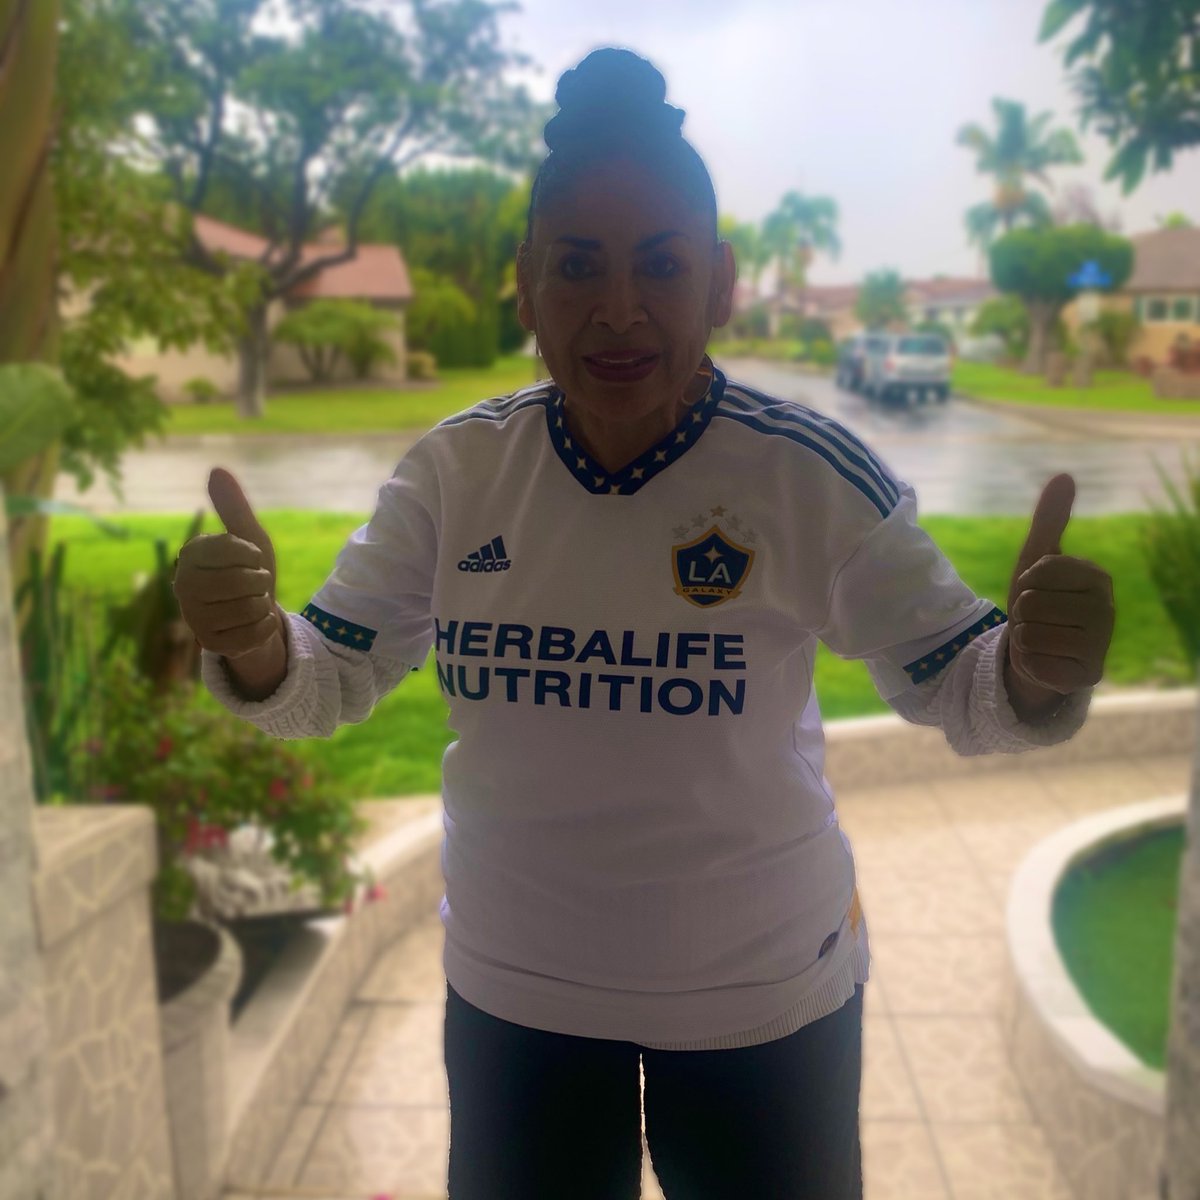 🚨Cali Classico🚨 

LA Galaxy geared up for the 99th clash with San Jose Earthquakes. Galaxy faithful, brace yourselves for a stellar performance! 💙💛 Mom's got her G'z spirit on, ready to see the Smurfs silenced! Let's roar with pride!  

#LAGalaxy #LAvSJ #CaliClassico